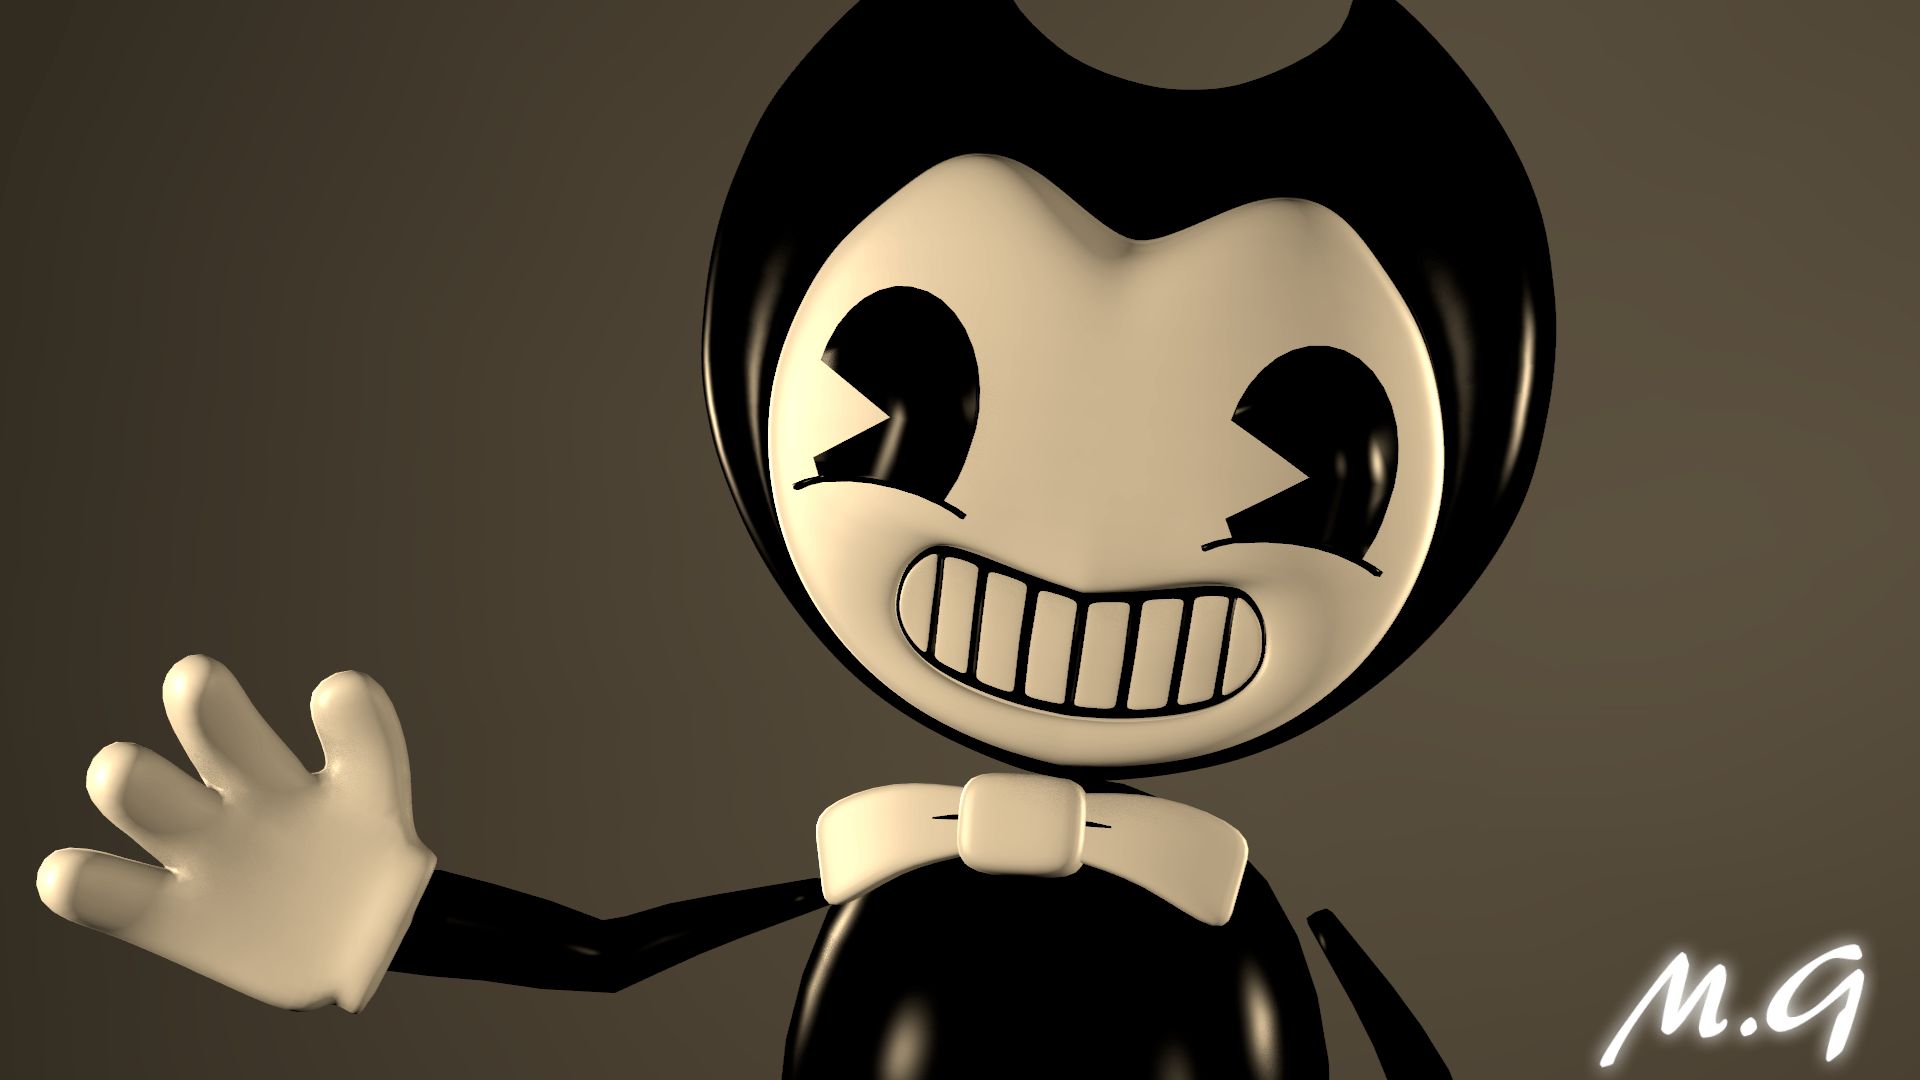 Bendy And The Ink Machine HD Mobile Wallpapers - Wallpaper Cave